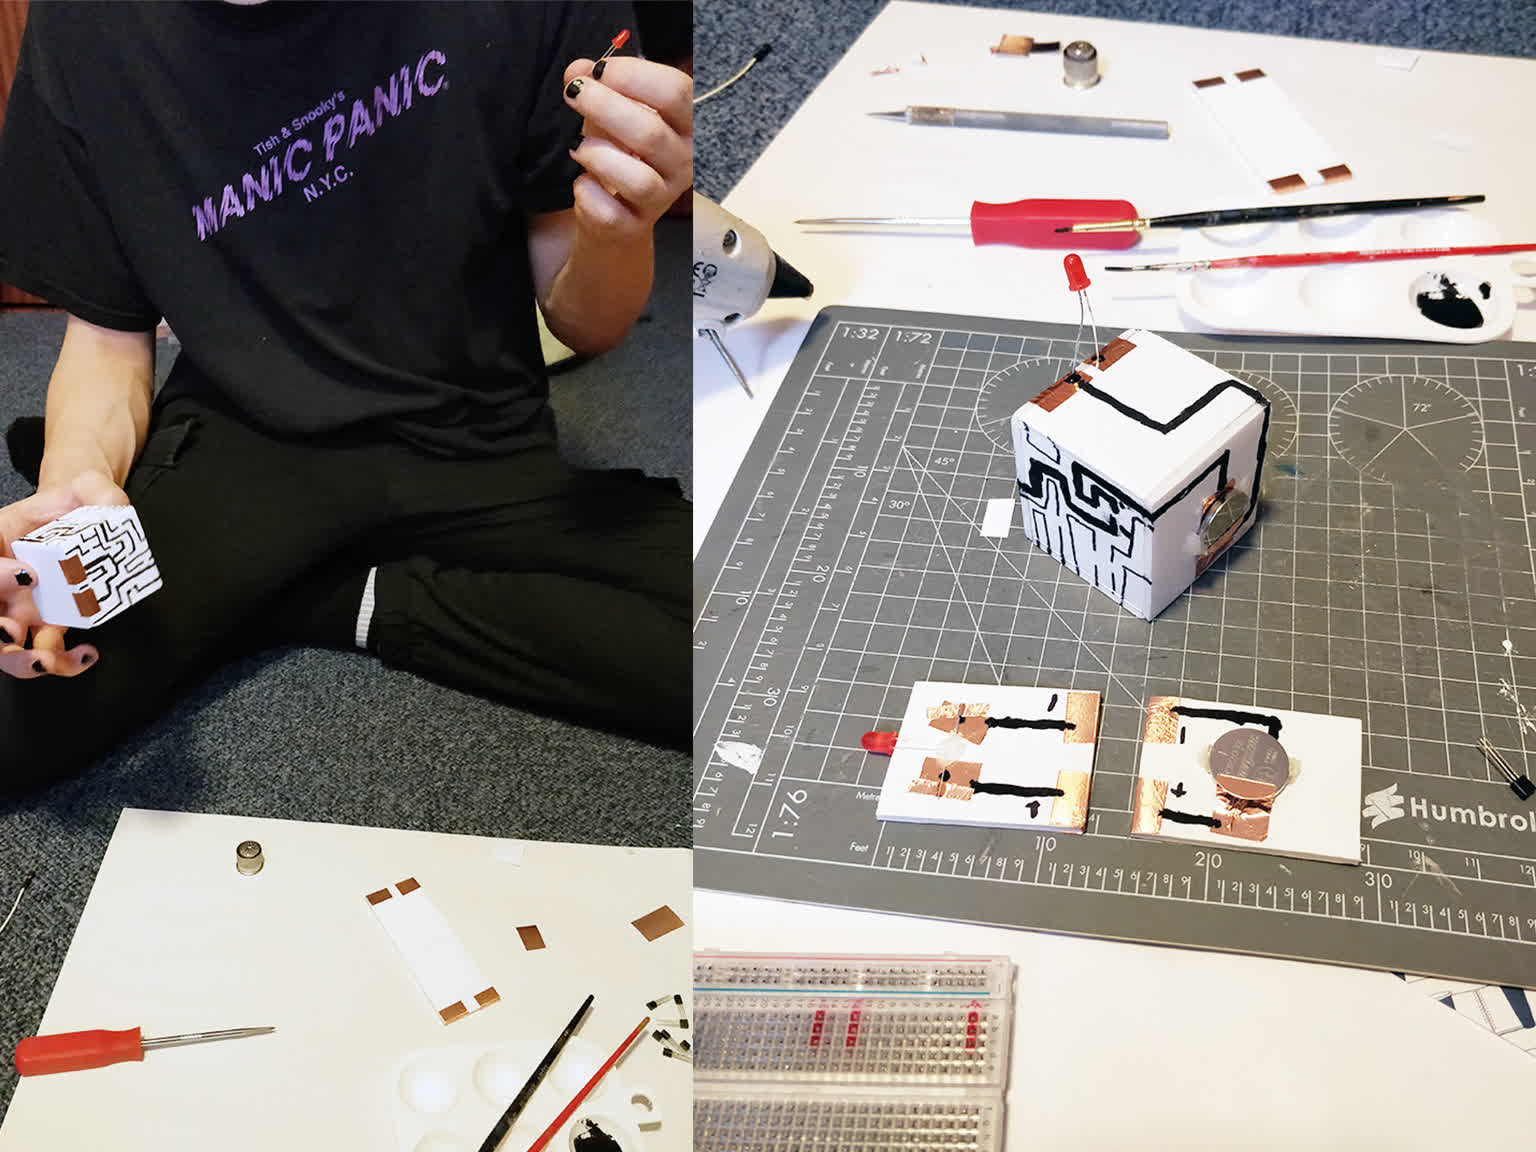 pictures from a making together workshop, where participants made digital electronic things from scratch